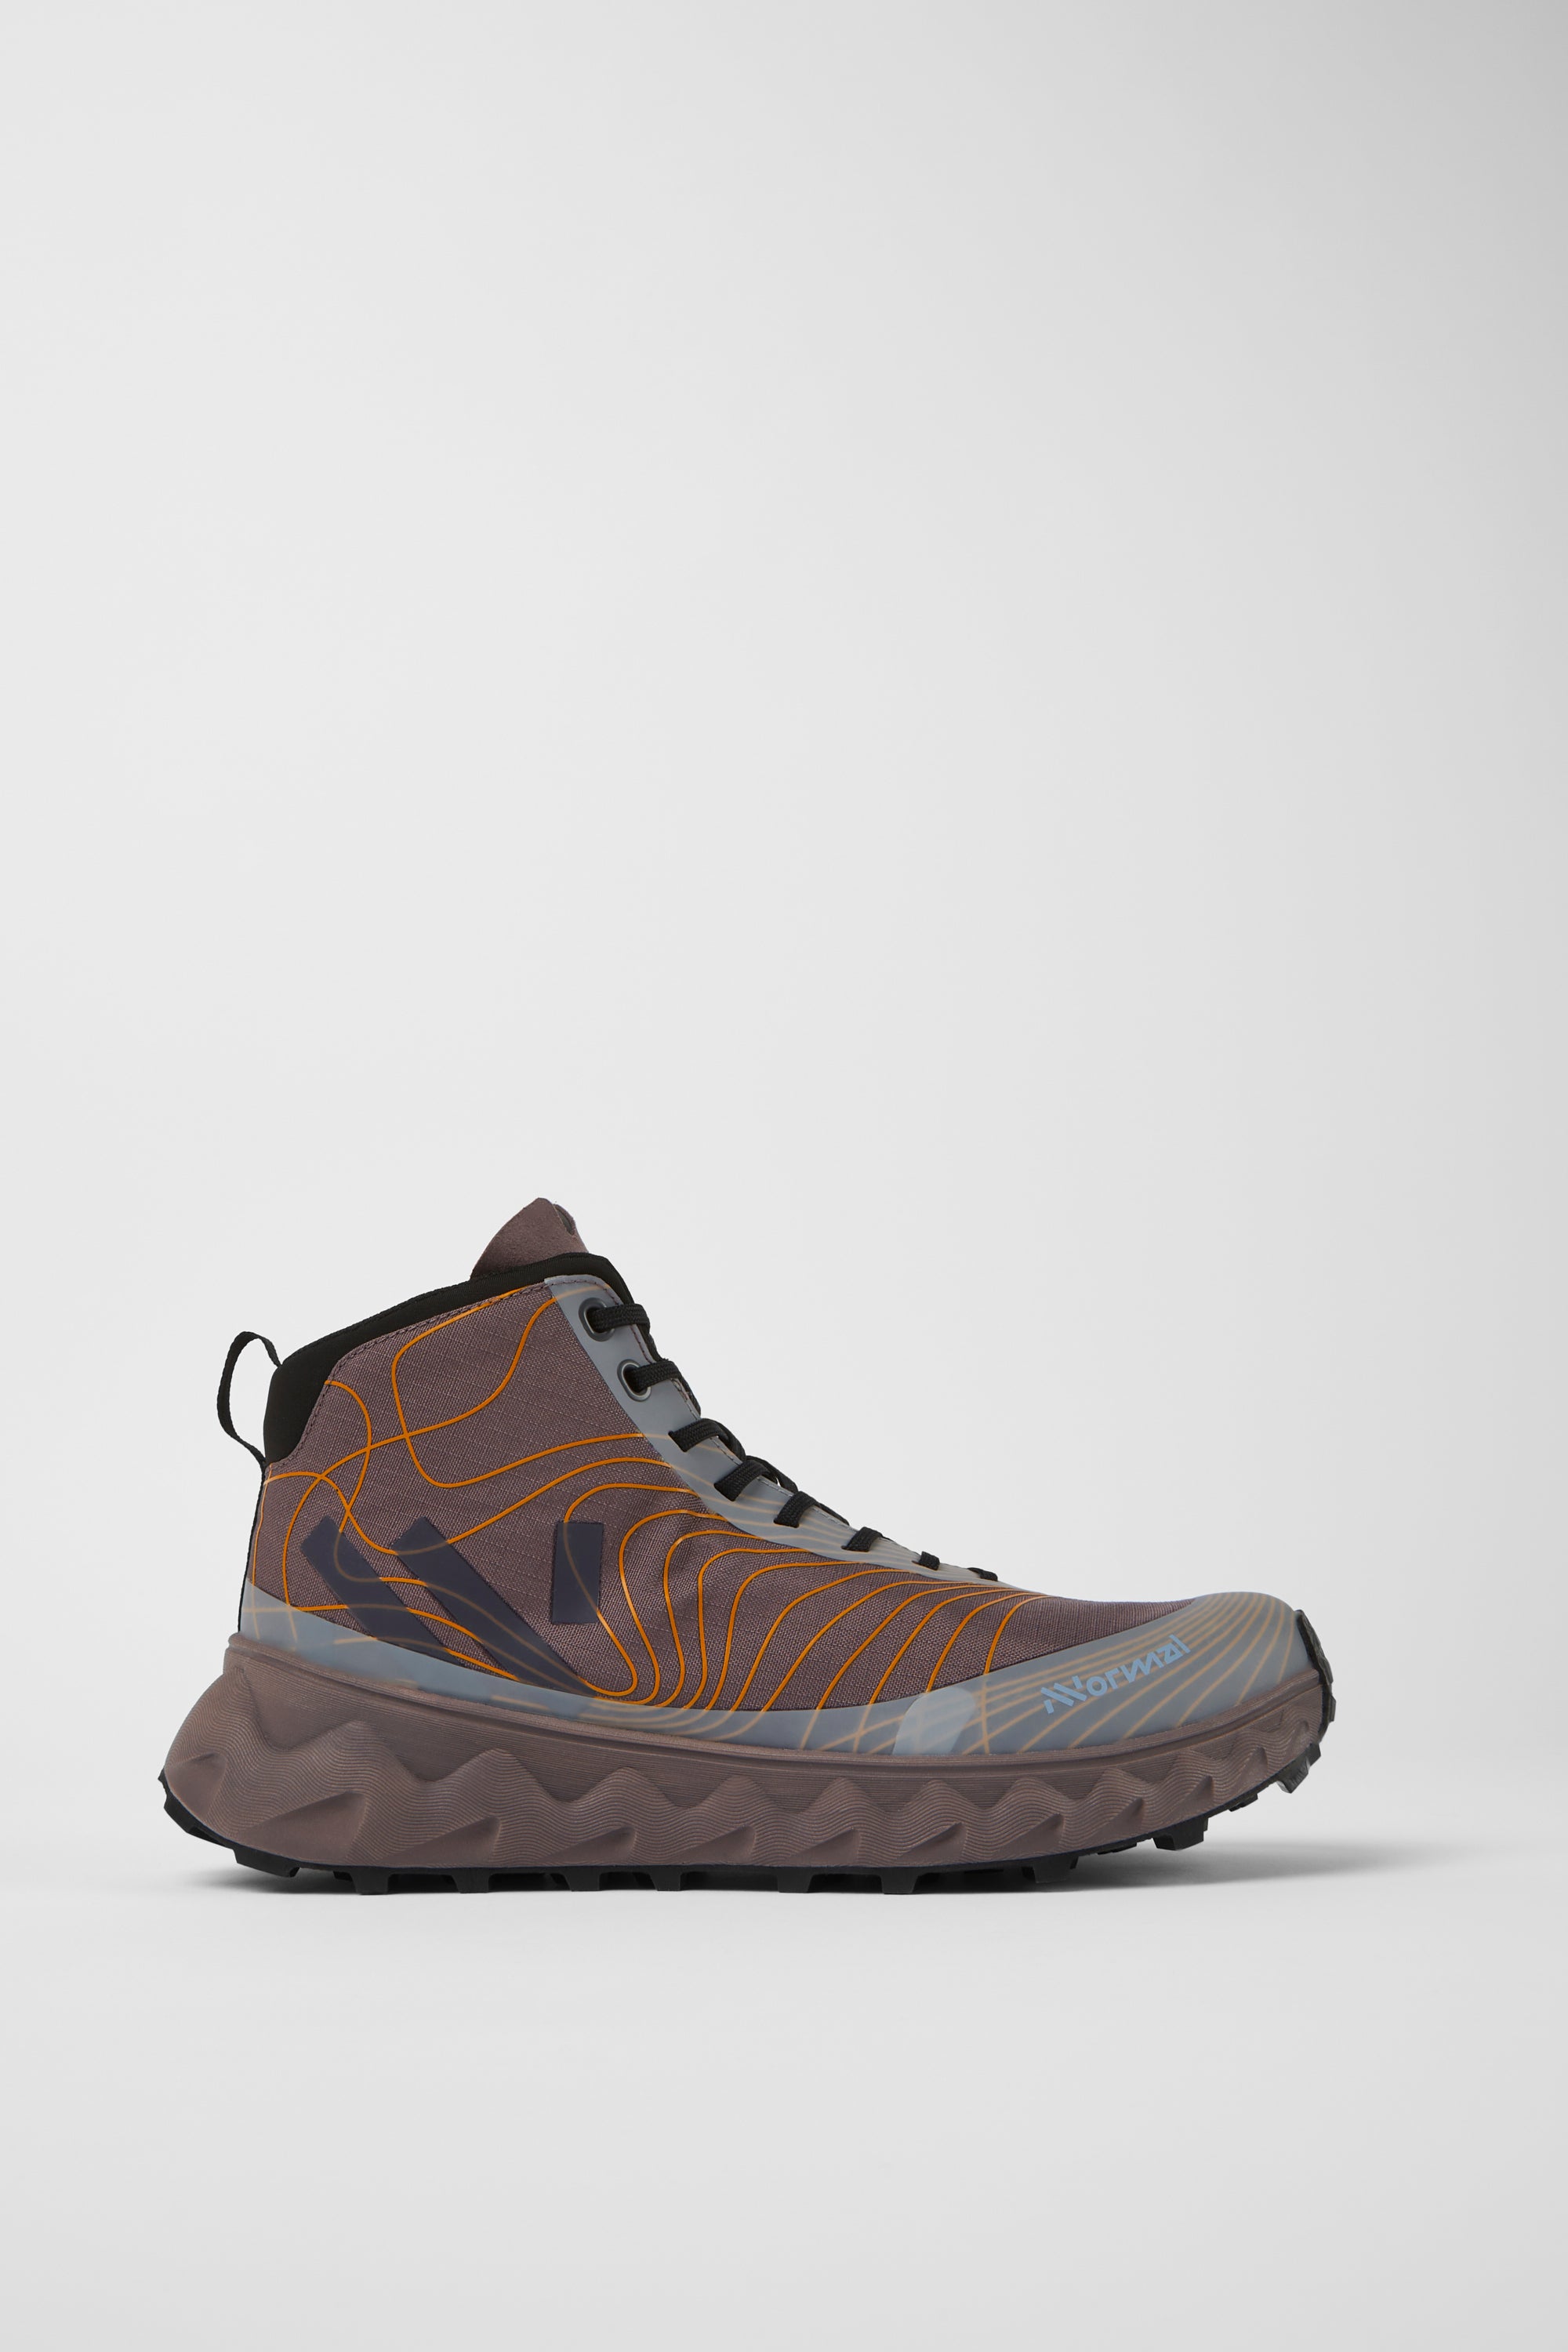 NNORMAL Tomir Waterproof Trail Boots - Unisex